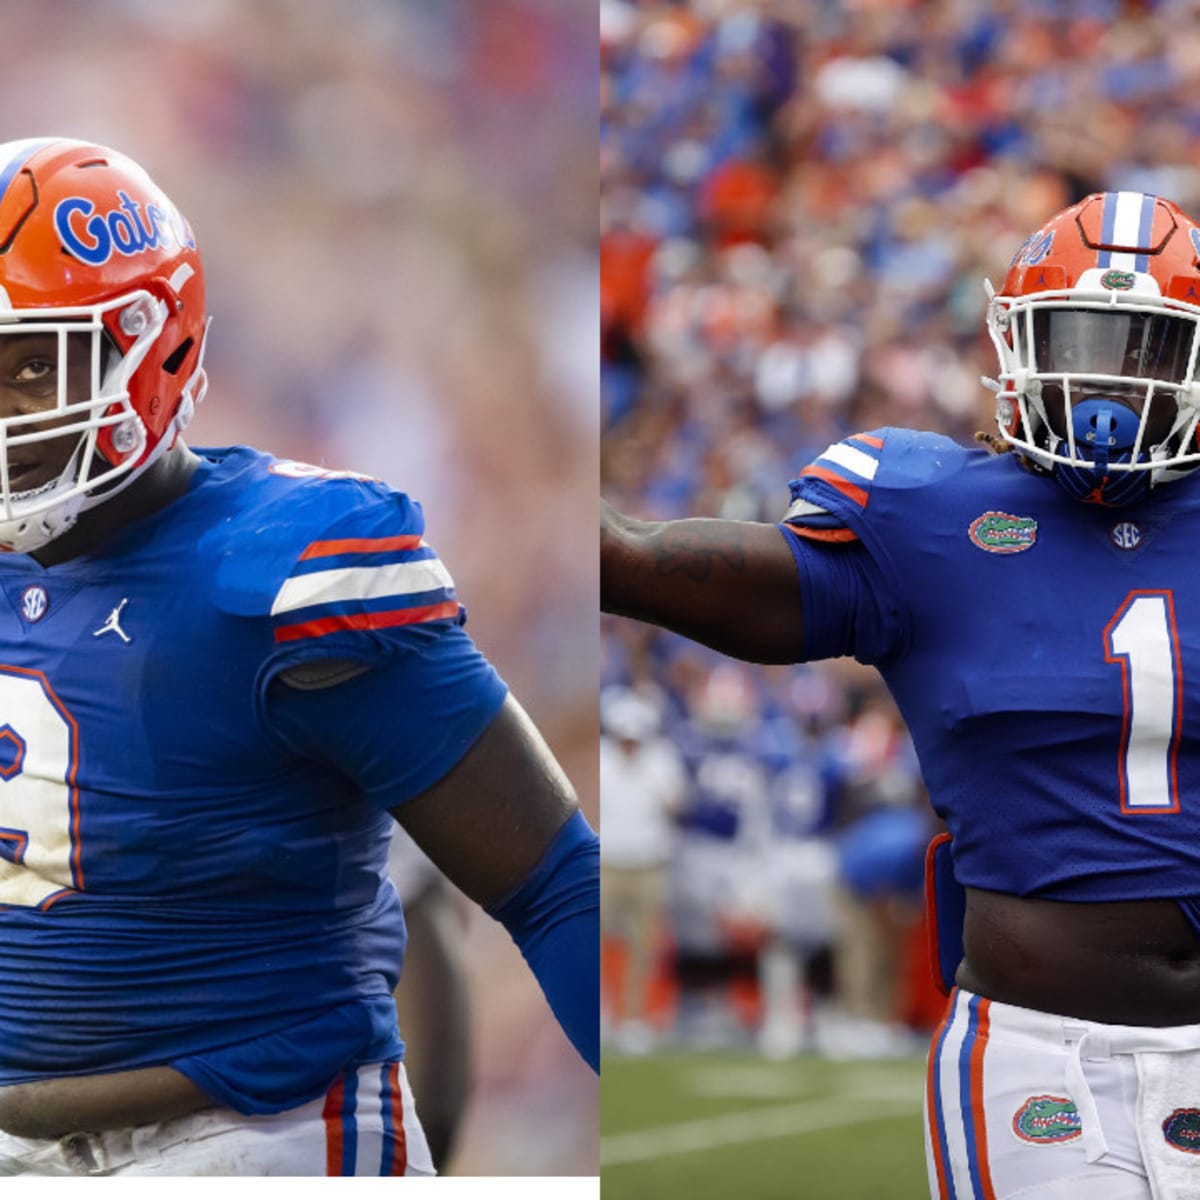 What do we know about the 2022 Florida Gators so far? - Alligator Army